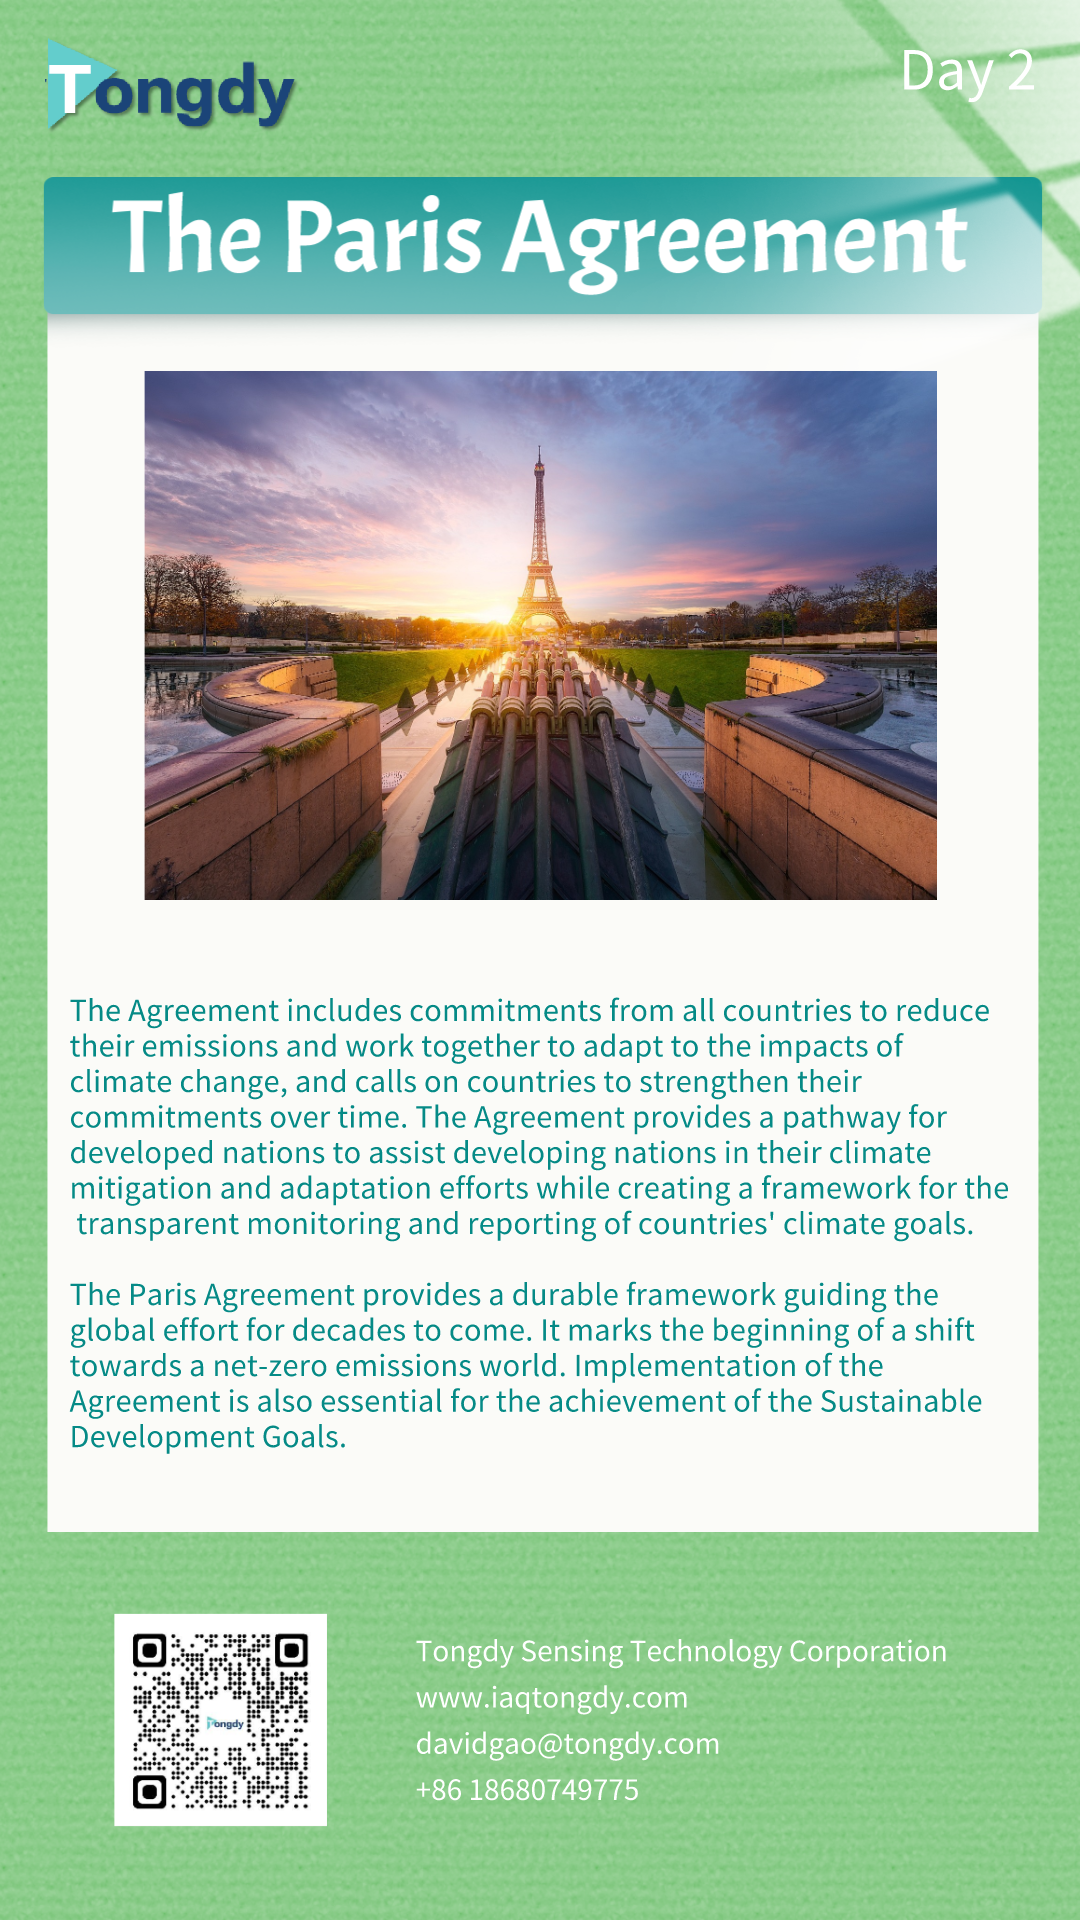 Day 2 The Paris Agreement